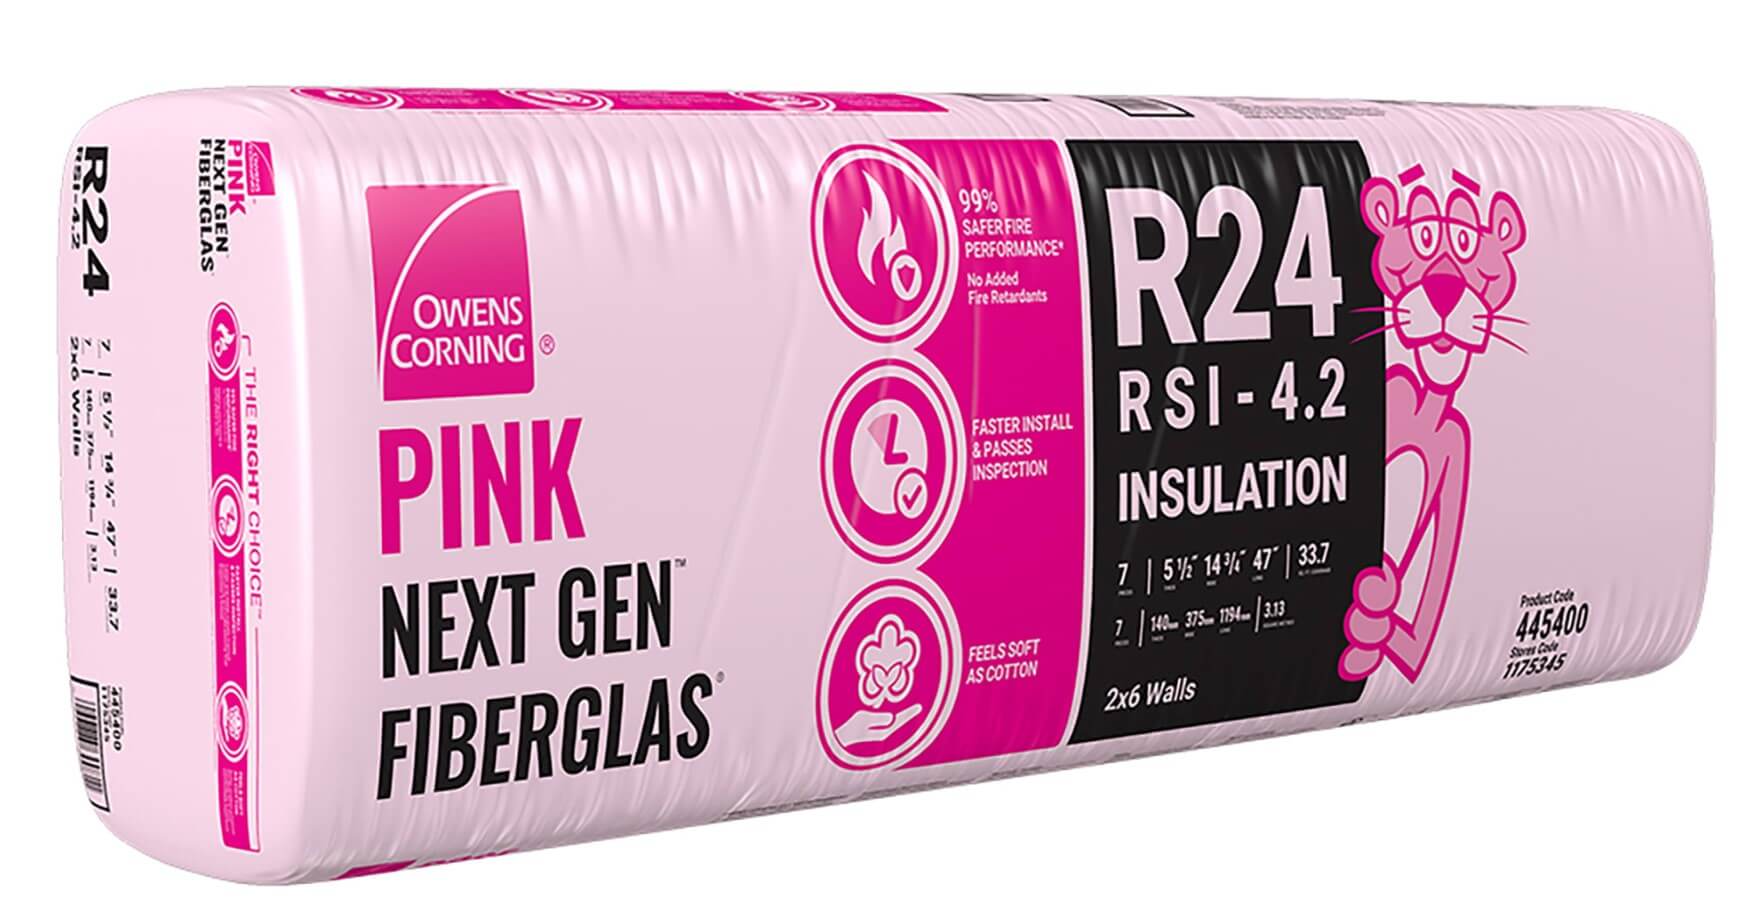 best prices on owens corning insulation